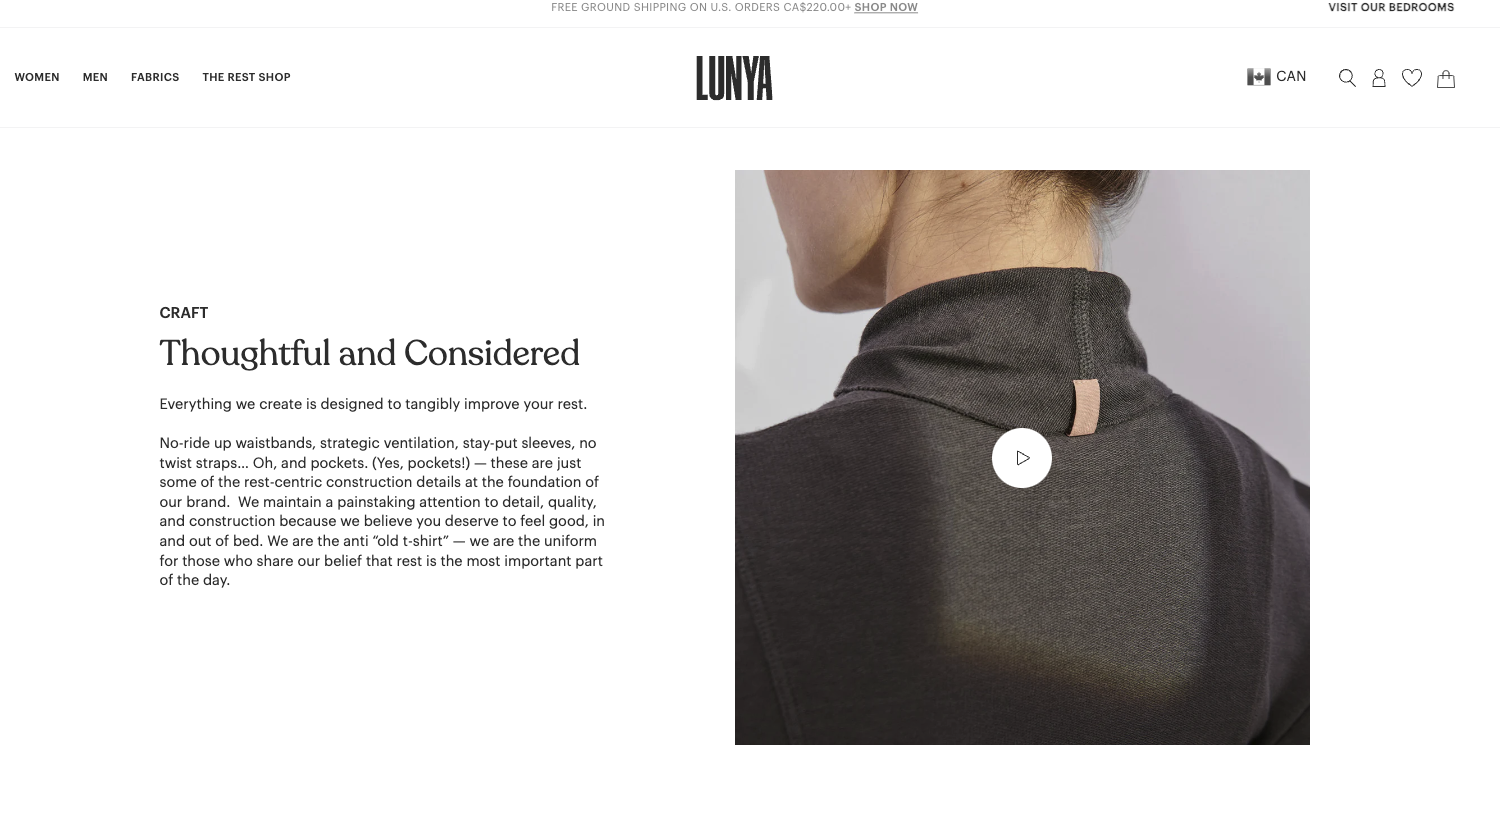 Lunya’s About Us page features a video that shows a video of models wearing their clothes including the details of the fabric and garment construction